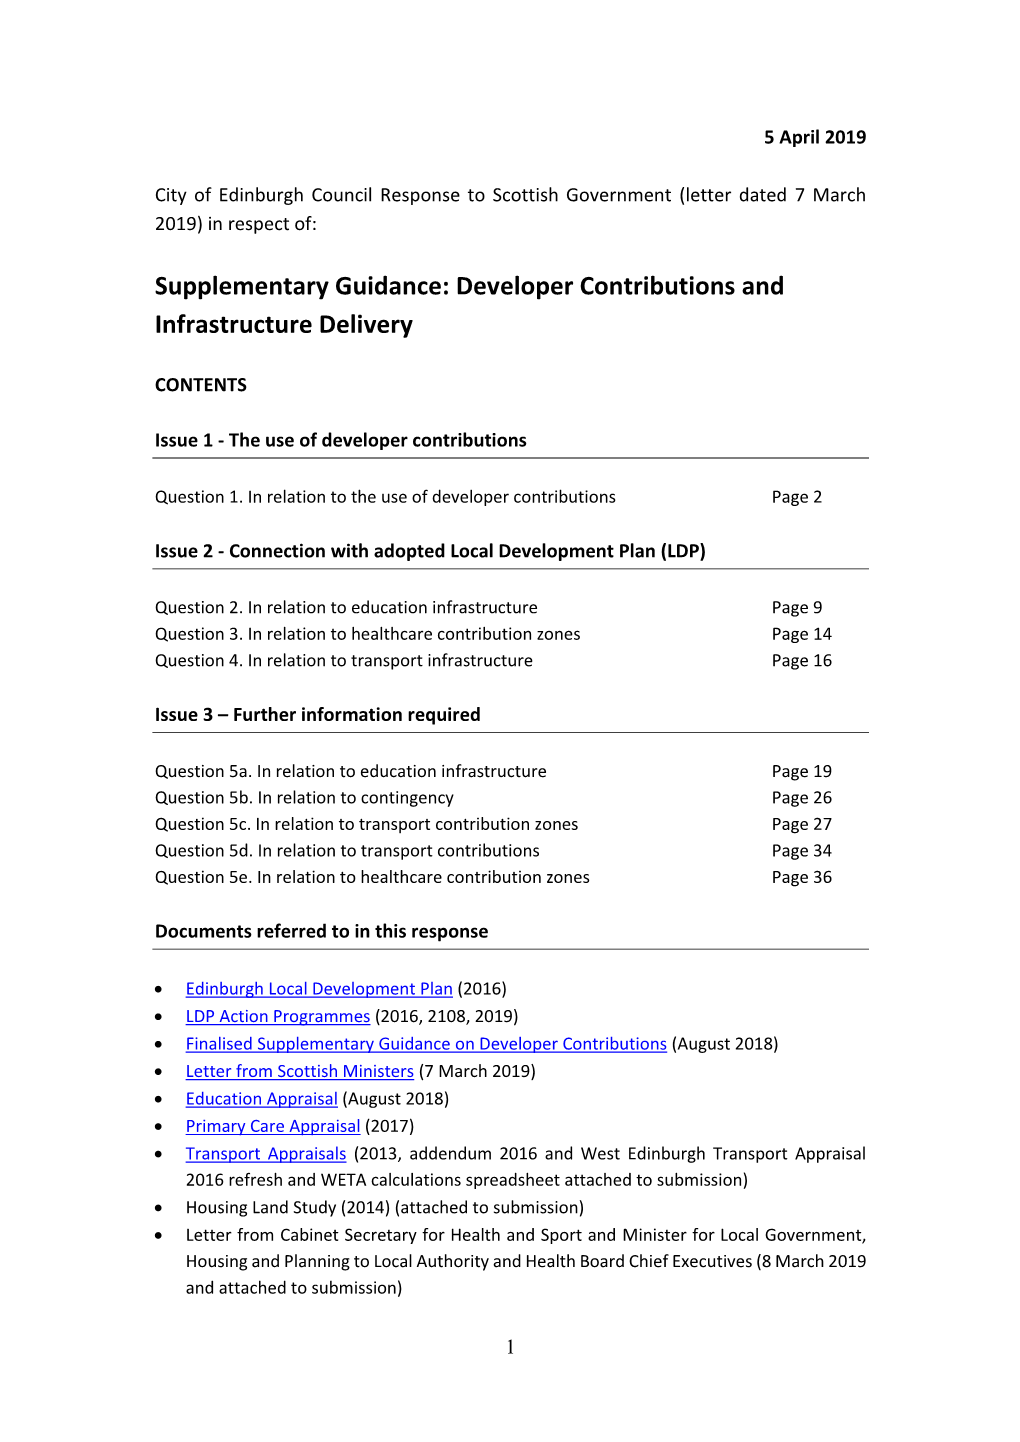 Supplementary Guidance: Developer Contributions and Infrastructure Delivery